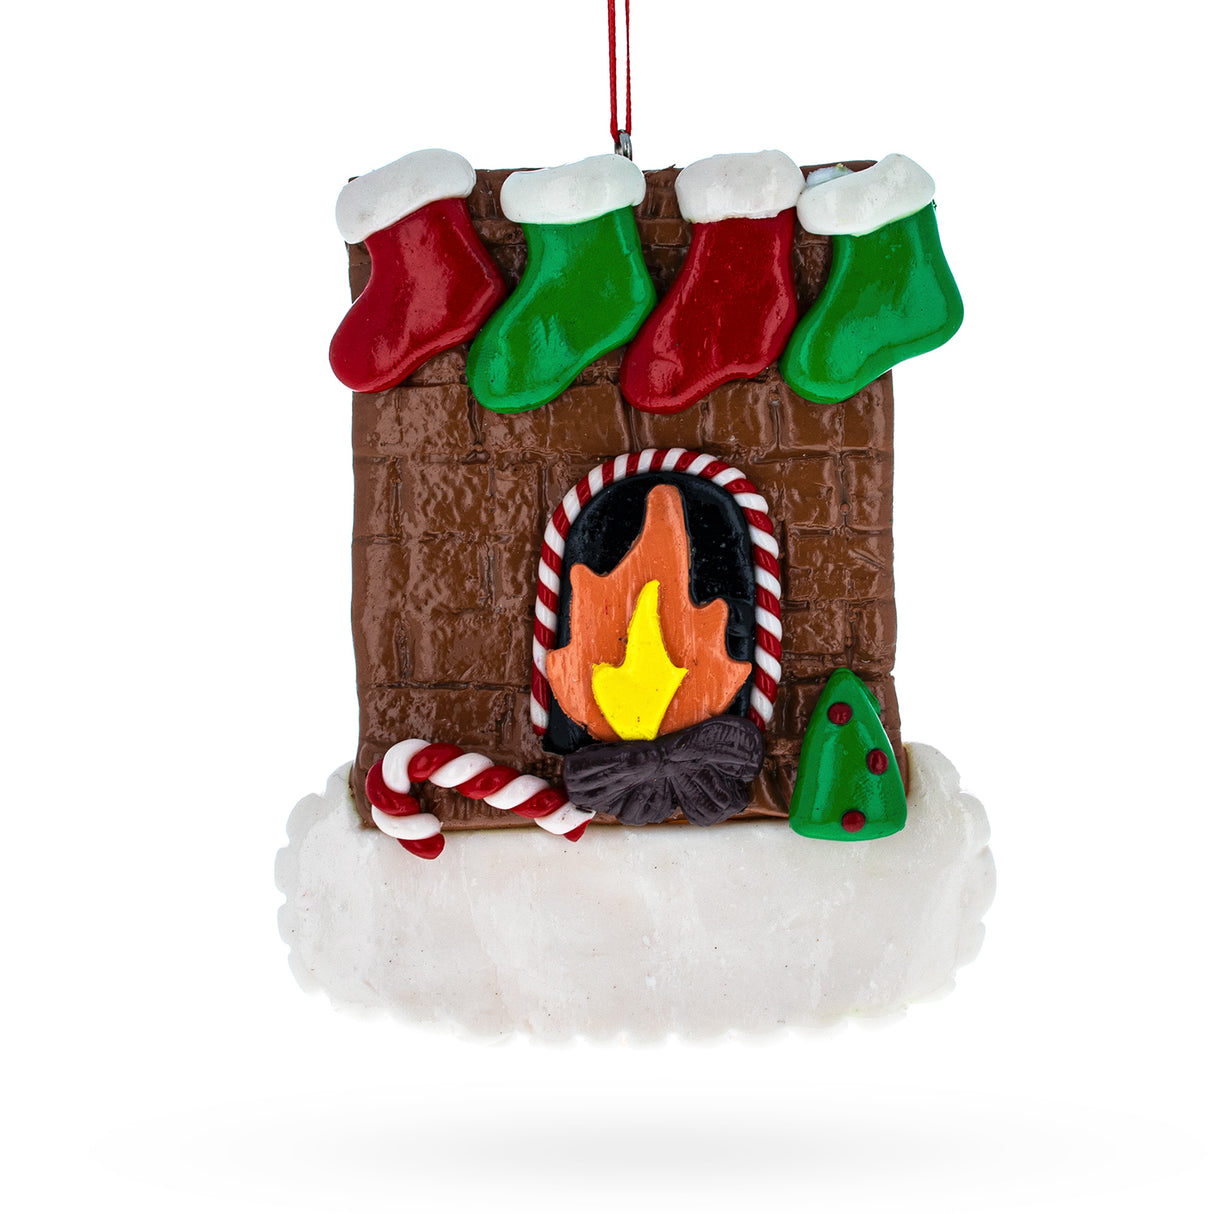 Fireplace with 4 Socks Clay-dough Christmas Ornament in Multi color,  shape